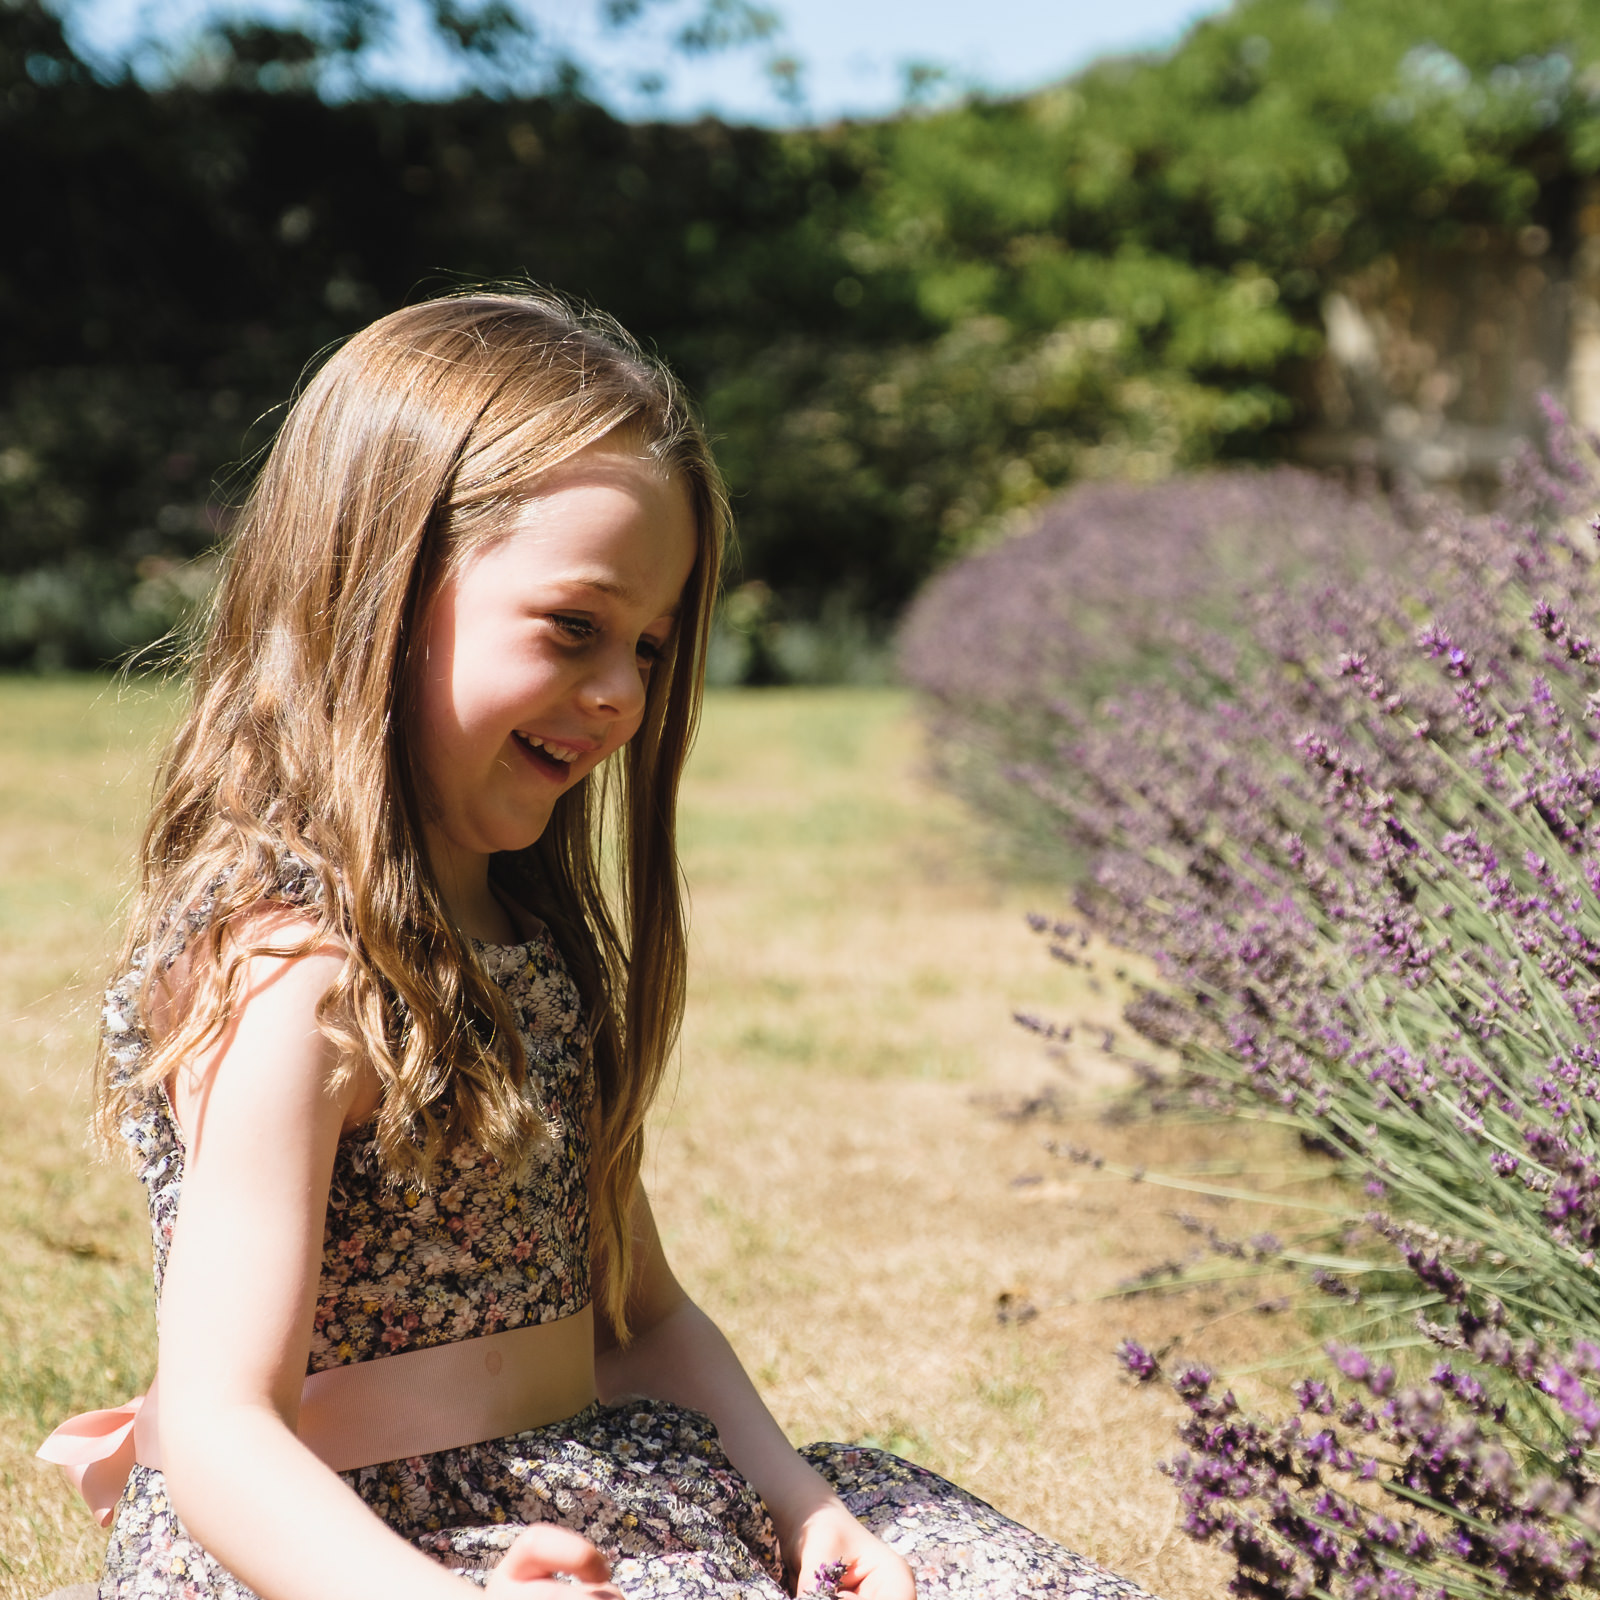 Family holiday photography - young girl in floral dress with lavender at Cotswold county house